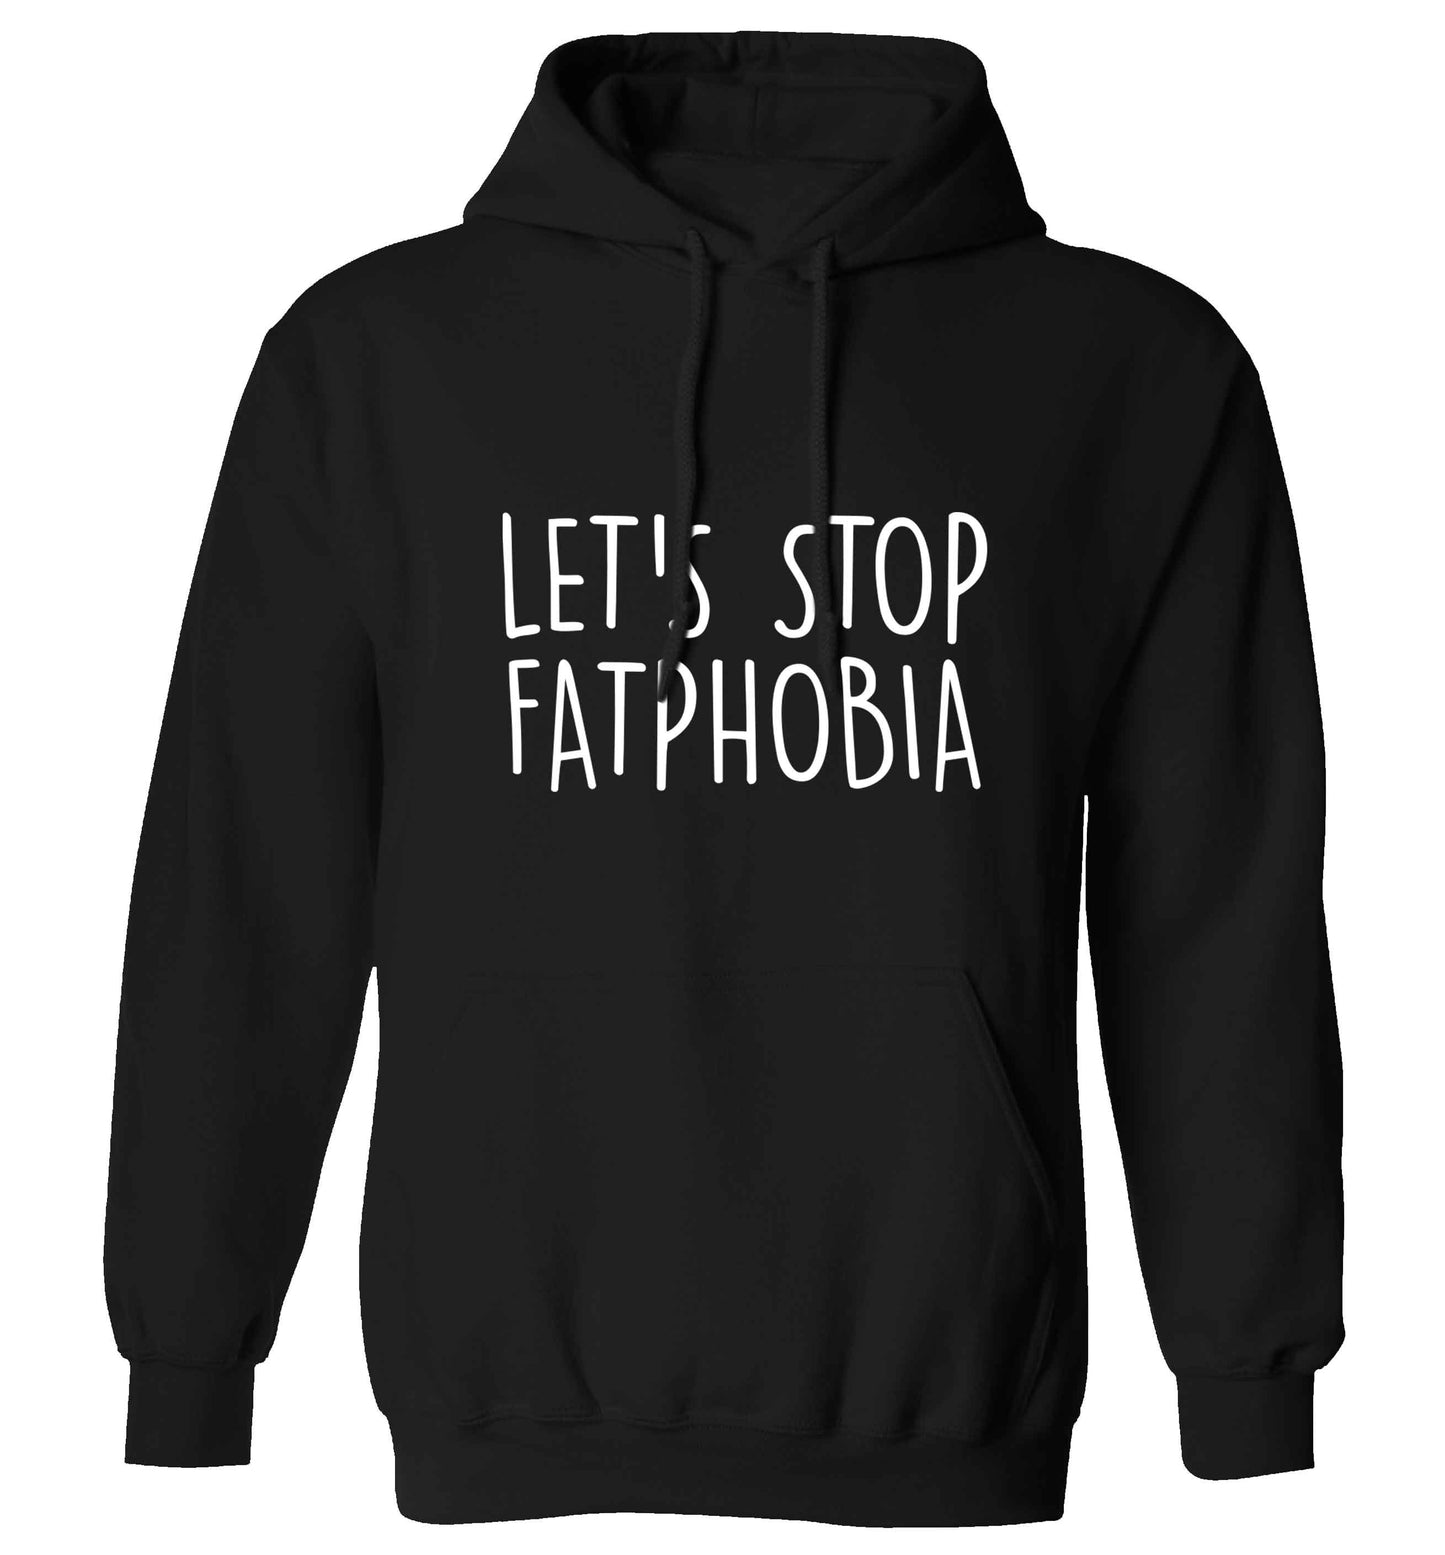 Let's stop fatphobia adults unisex black hoodie 2XL